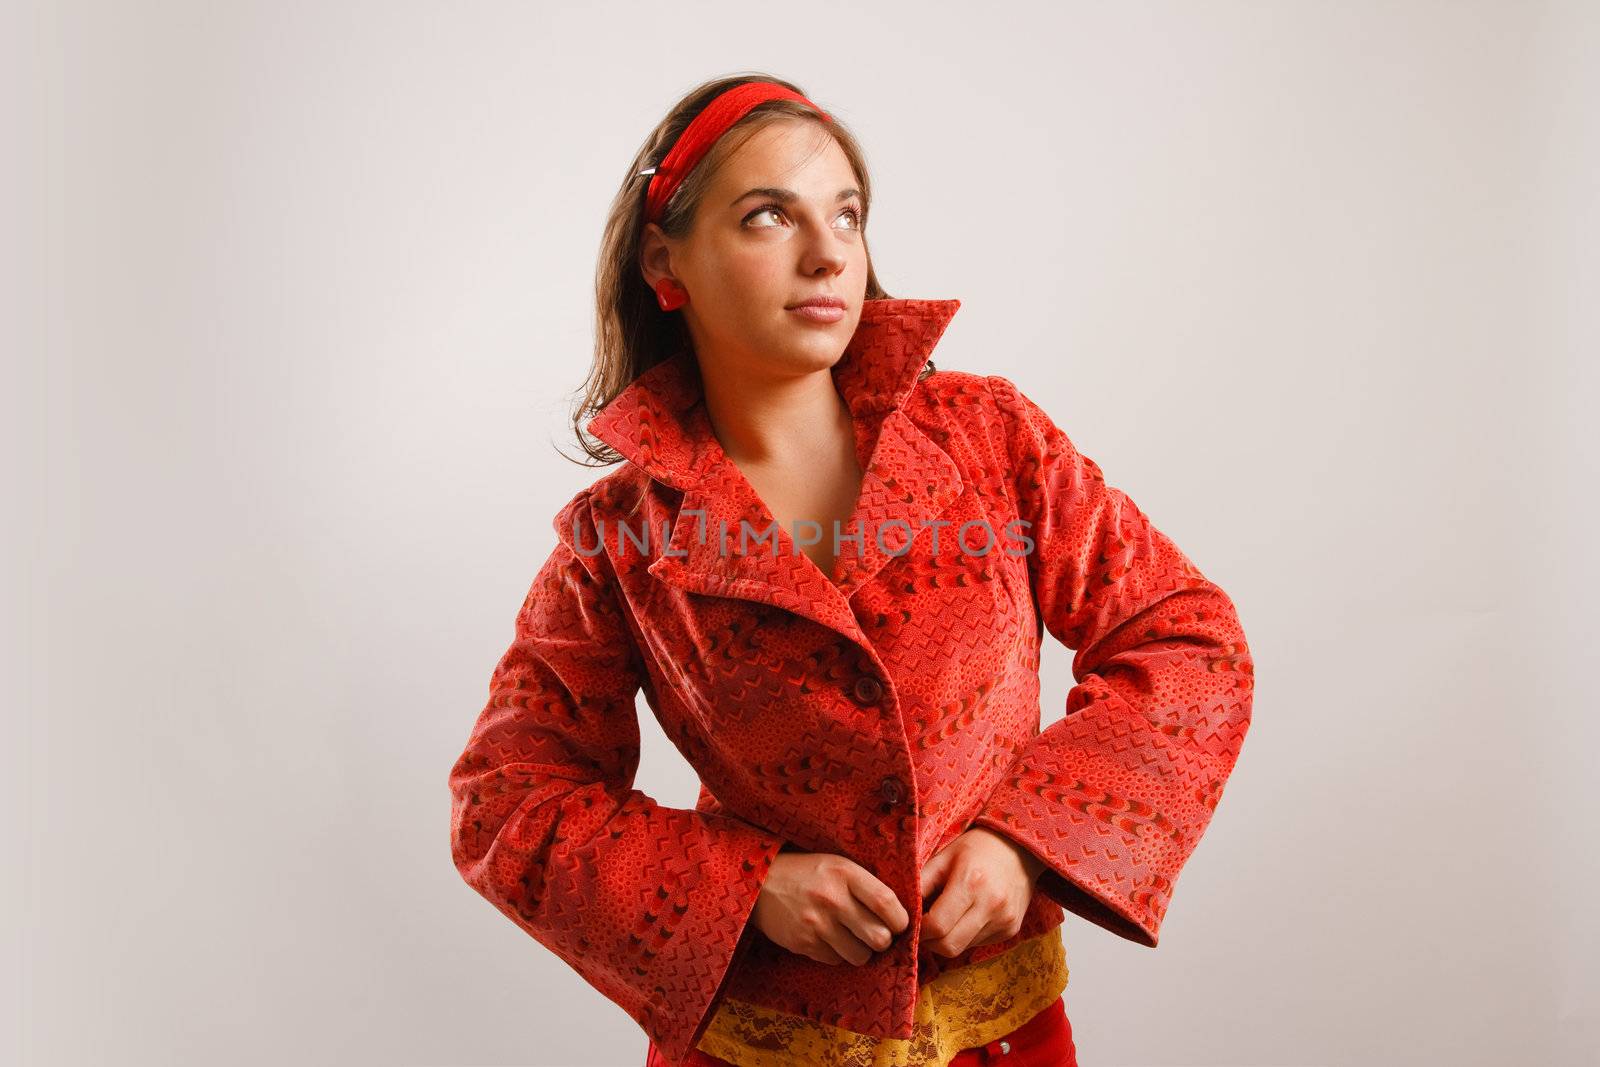 Modern looking young woman wearing a red jacket